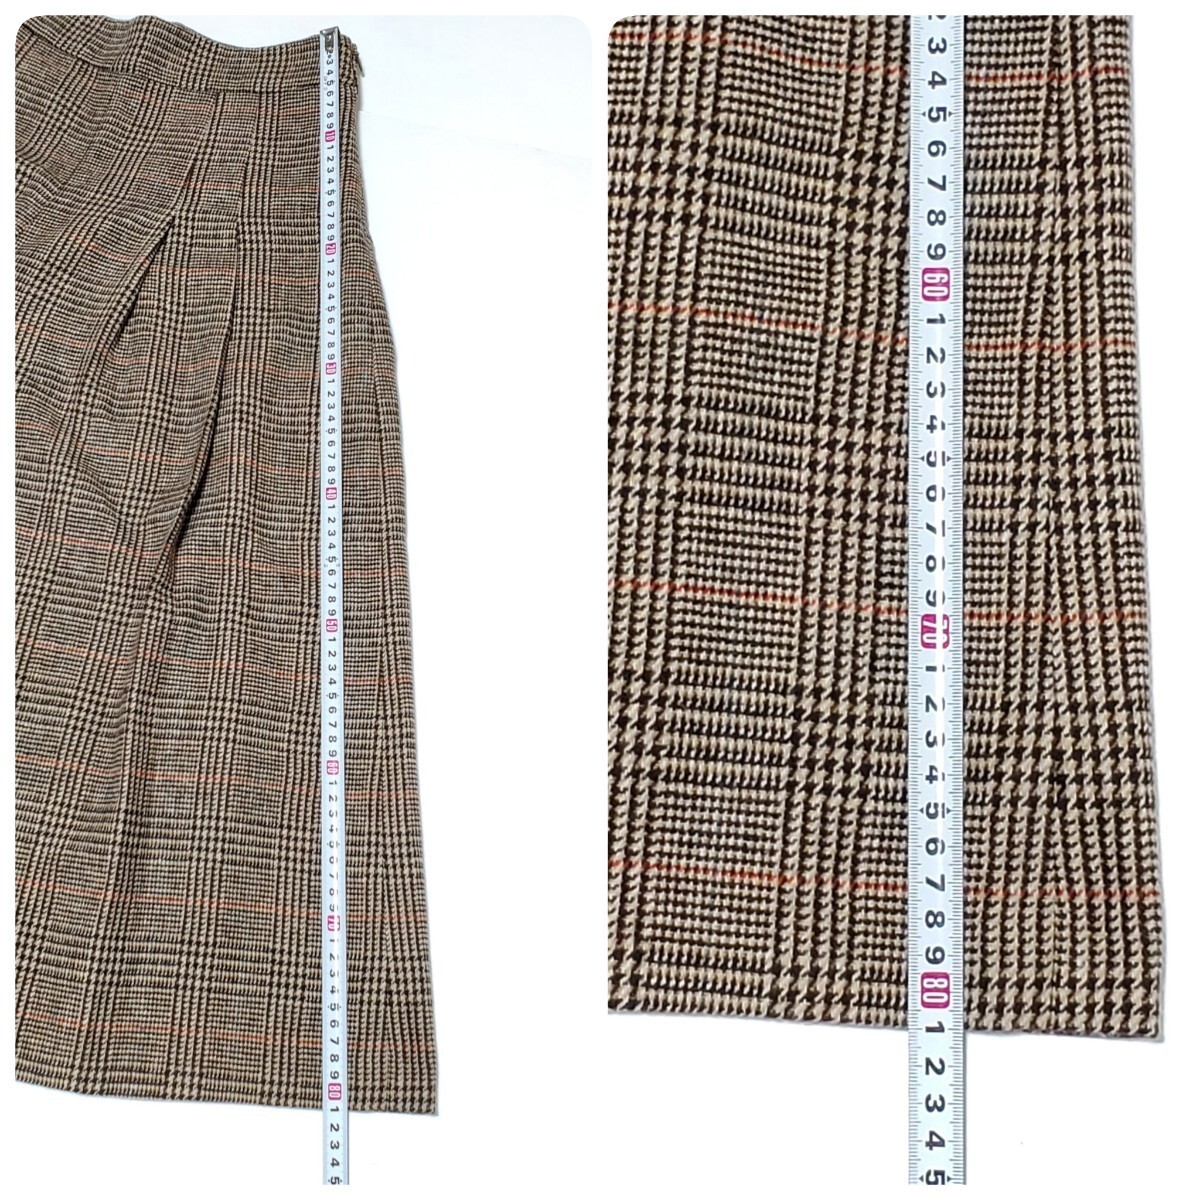 DoCLASSEduklase tweed Like *s couch . brown group size 11 tag attaching unused goods gaucho pants culotte 